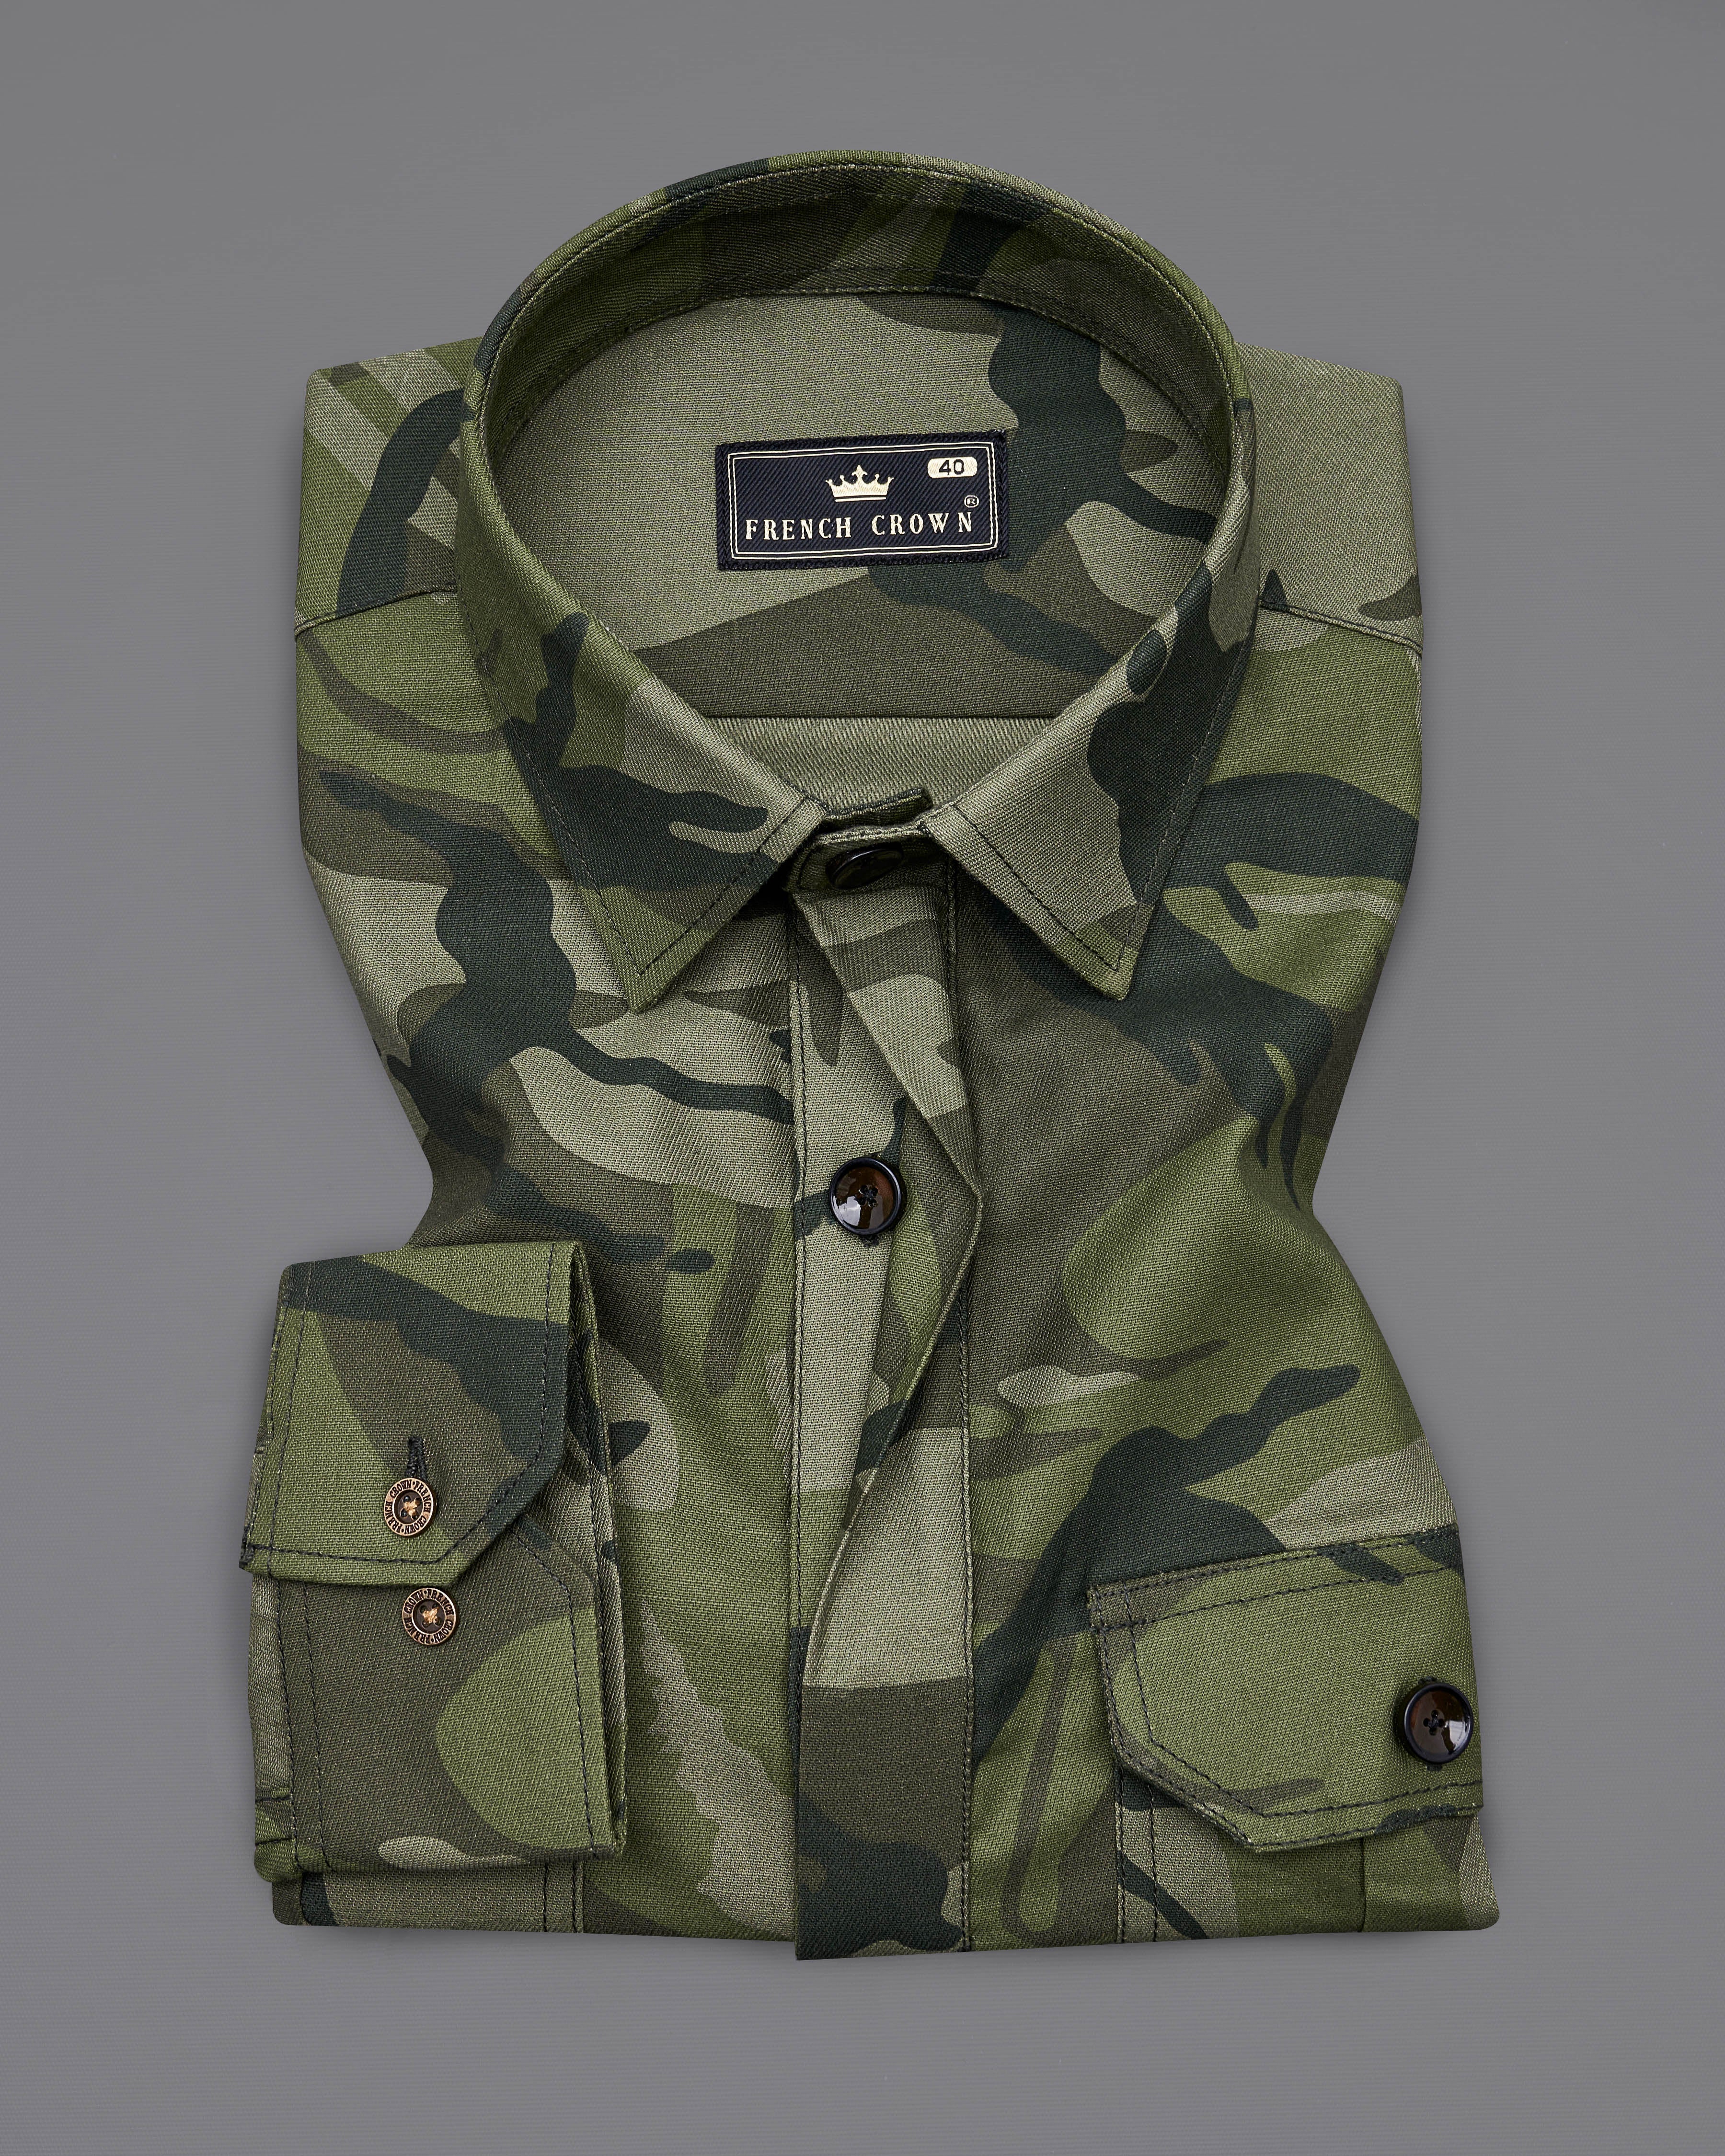 Finch Green with Taupe Brown Camouflage Printed Royal Oxford Designer OverShirt 8931-BLK-P329-38, 8931-BLK-P329-H-38,  8931-BLK-P329-39,  8931-BLK-P329-H-39,  8931-BLK-P329-40,  8931-BLK-P329-H-40,  8931-BLK-P329-42,  8931-BLK-P329-H-42,  8931-BLK-P329-44,  8931-BLK-P329-H-44,  8931-BLK-P329-46,  8931-BLK-P329-H-46,  8931-BLK-P329-48,  8931-BLK-P329-H-48,  8931-BLK-P329-50,  8931-BLK-P329-H-50,  8931-BLK-P329-52,  8931-BLK-P329-H-52